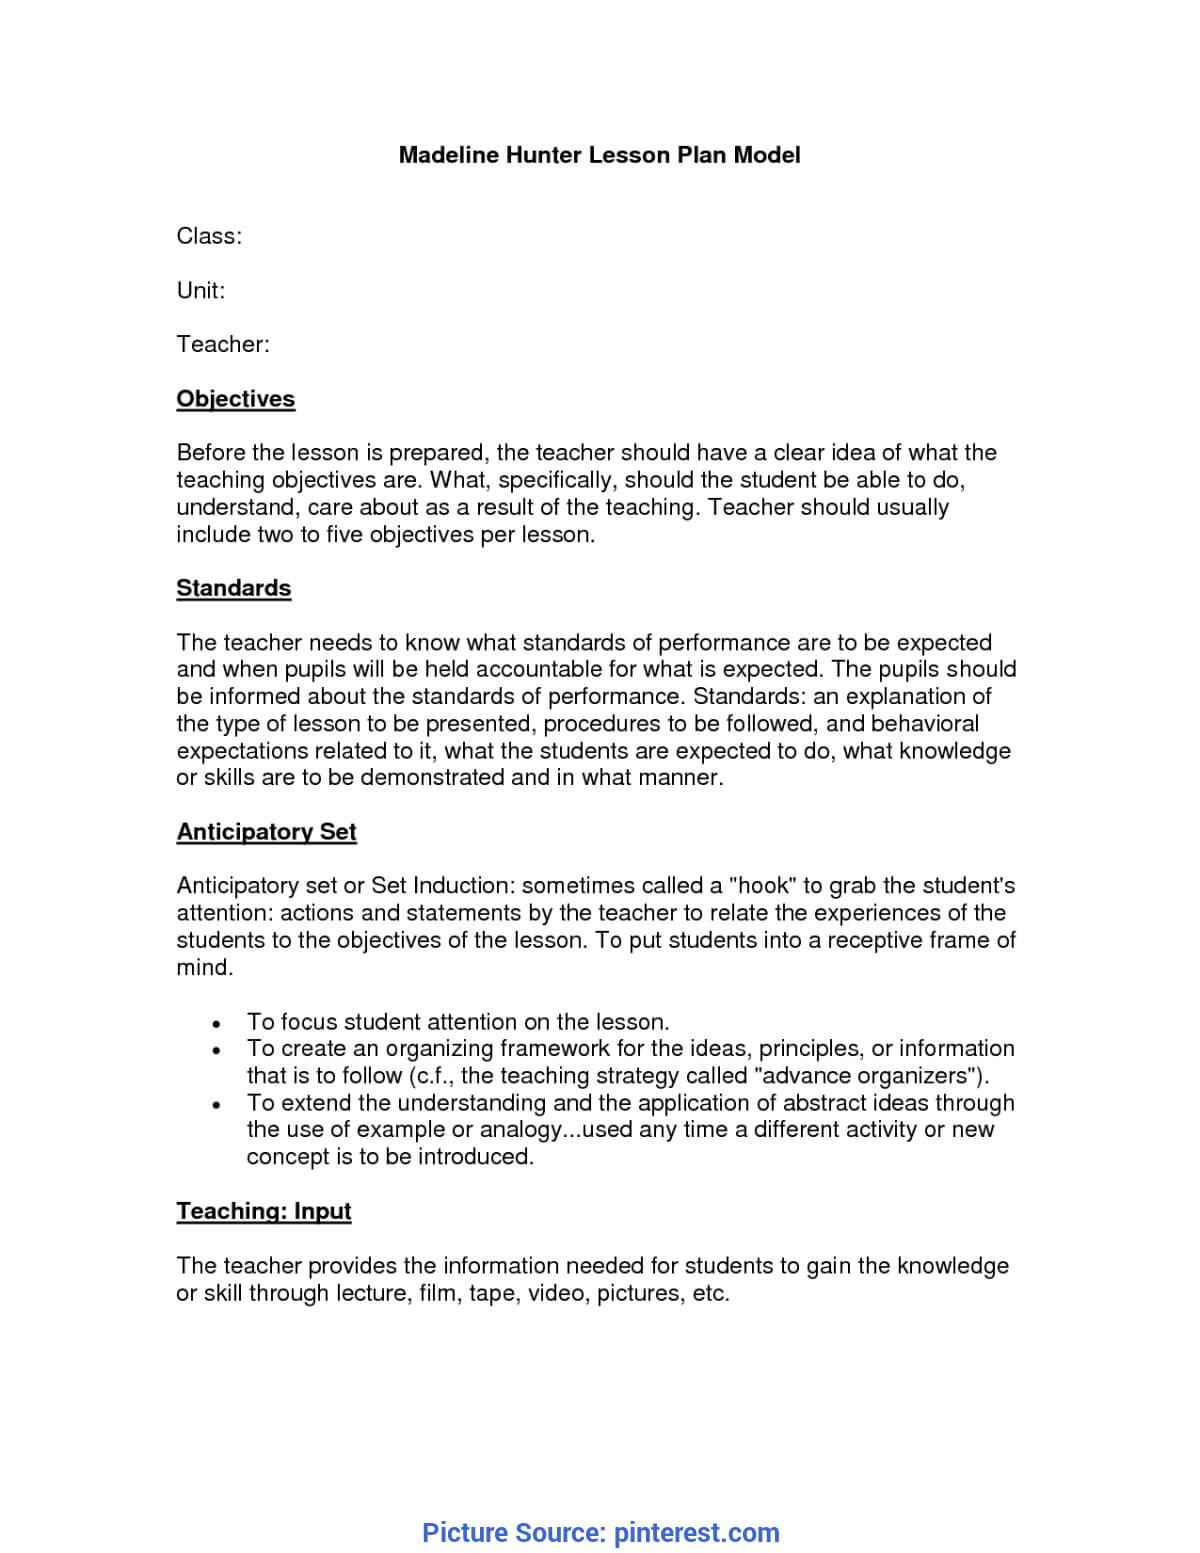 Madeline Hunter Lesson Plan Template Word – Tosya.magdalene For Madeline Hunter Lesson Plan Blank Template